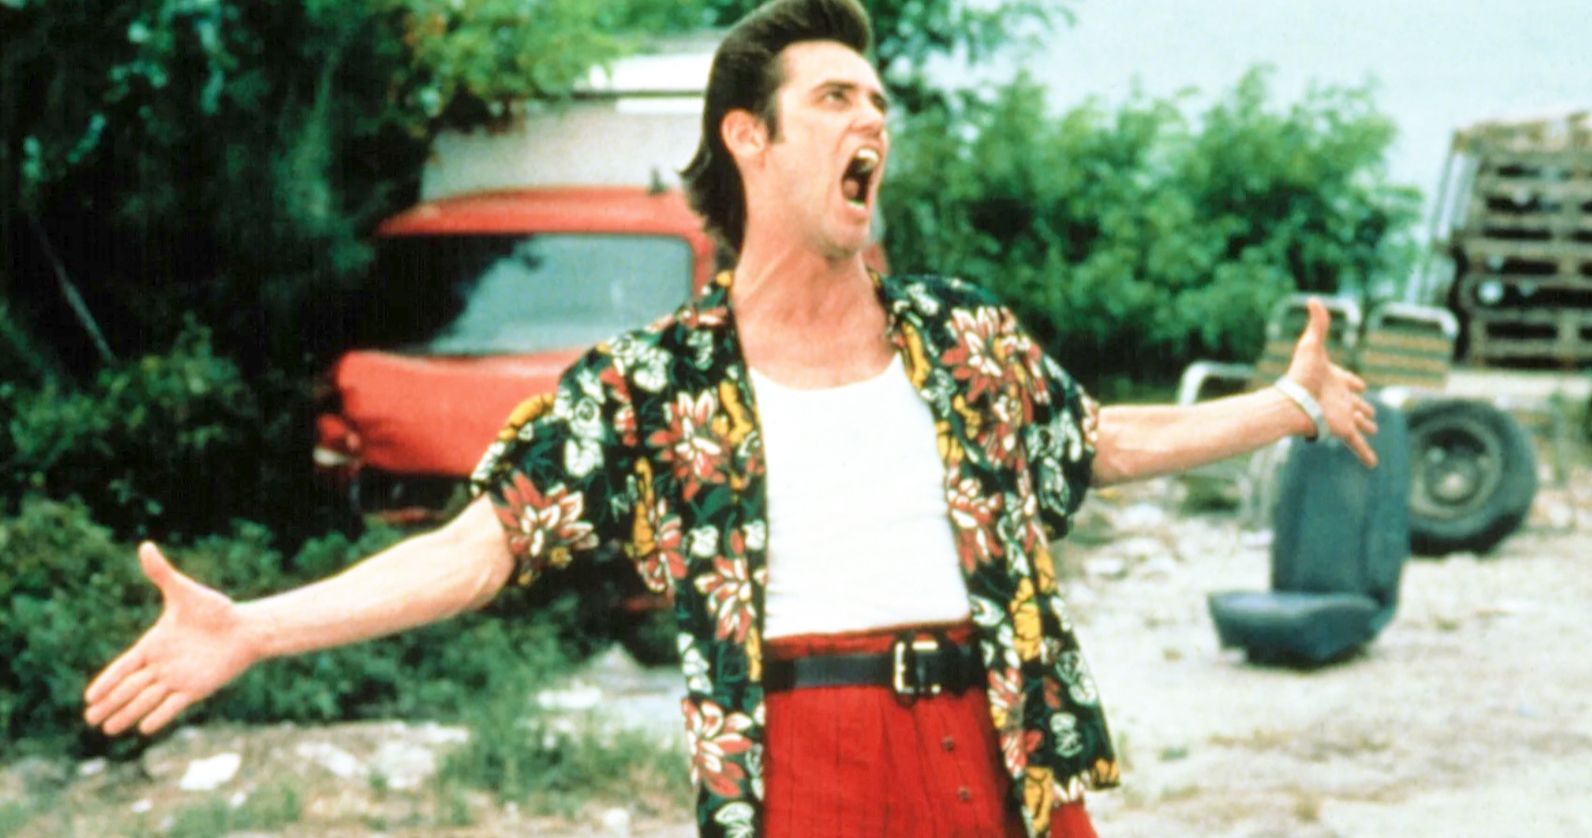 Ace Ventura 3 Planned at Amazon for Theatrical Release, But Will Jim Carrey Return?